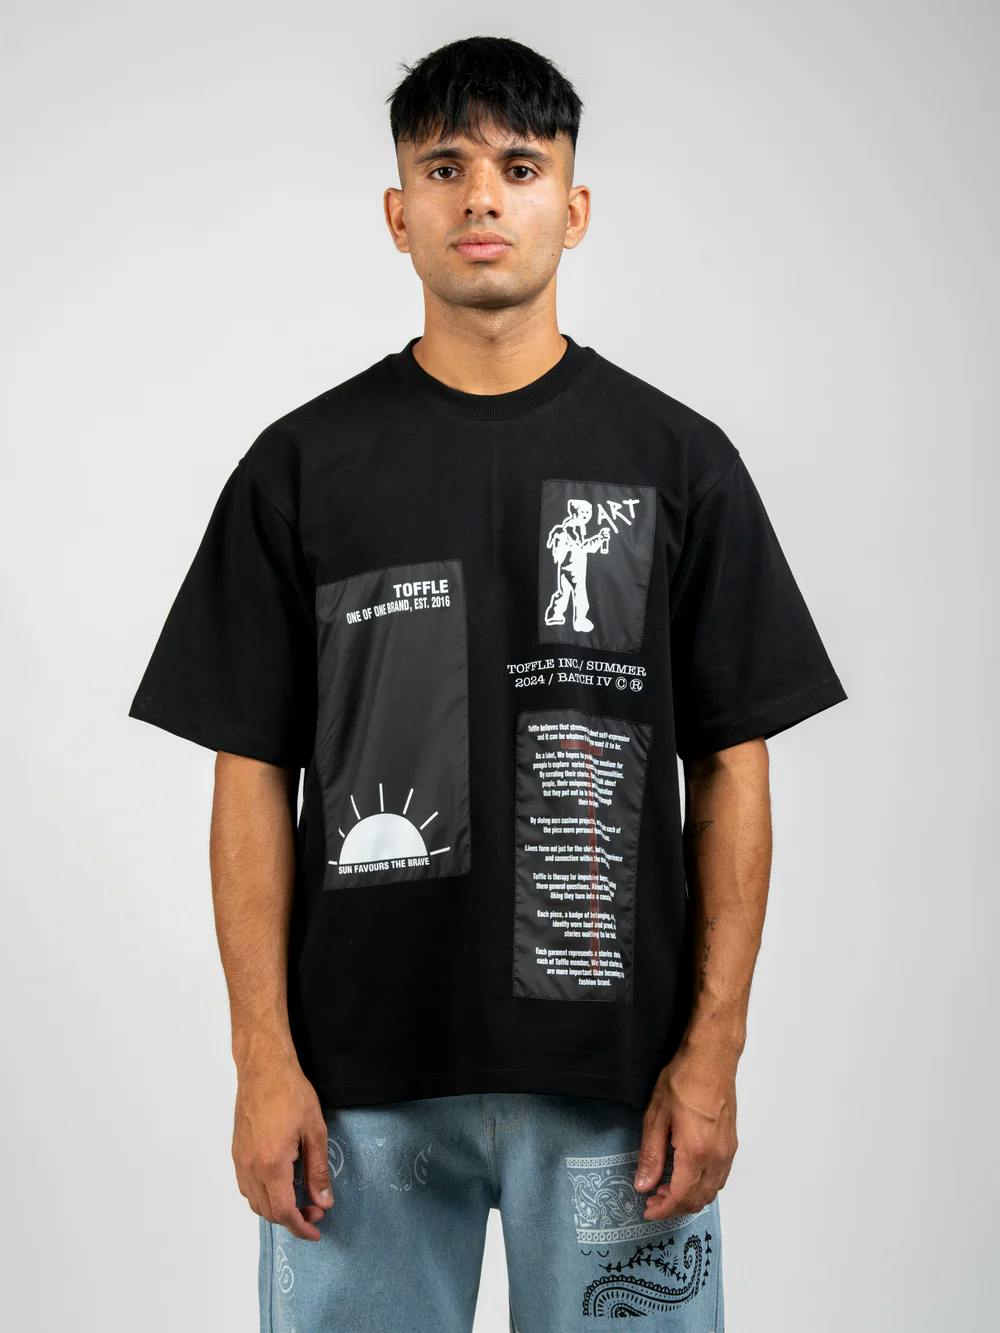 Black on Black Patchwork T-shirt, a product by TOFFLE